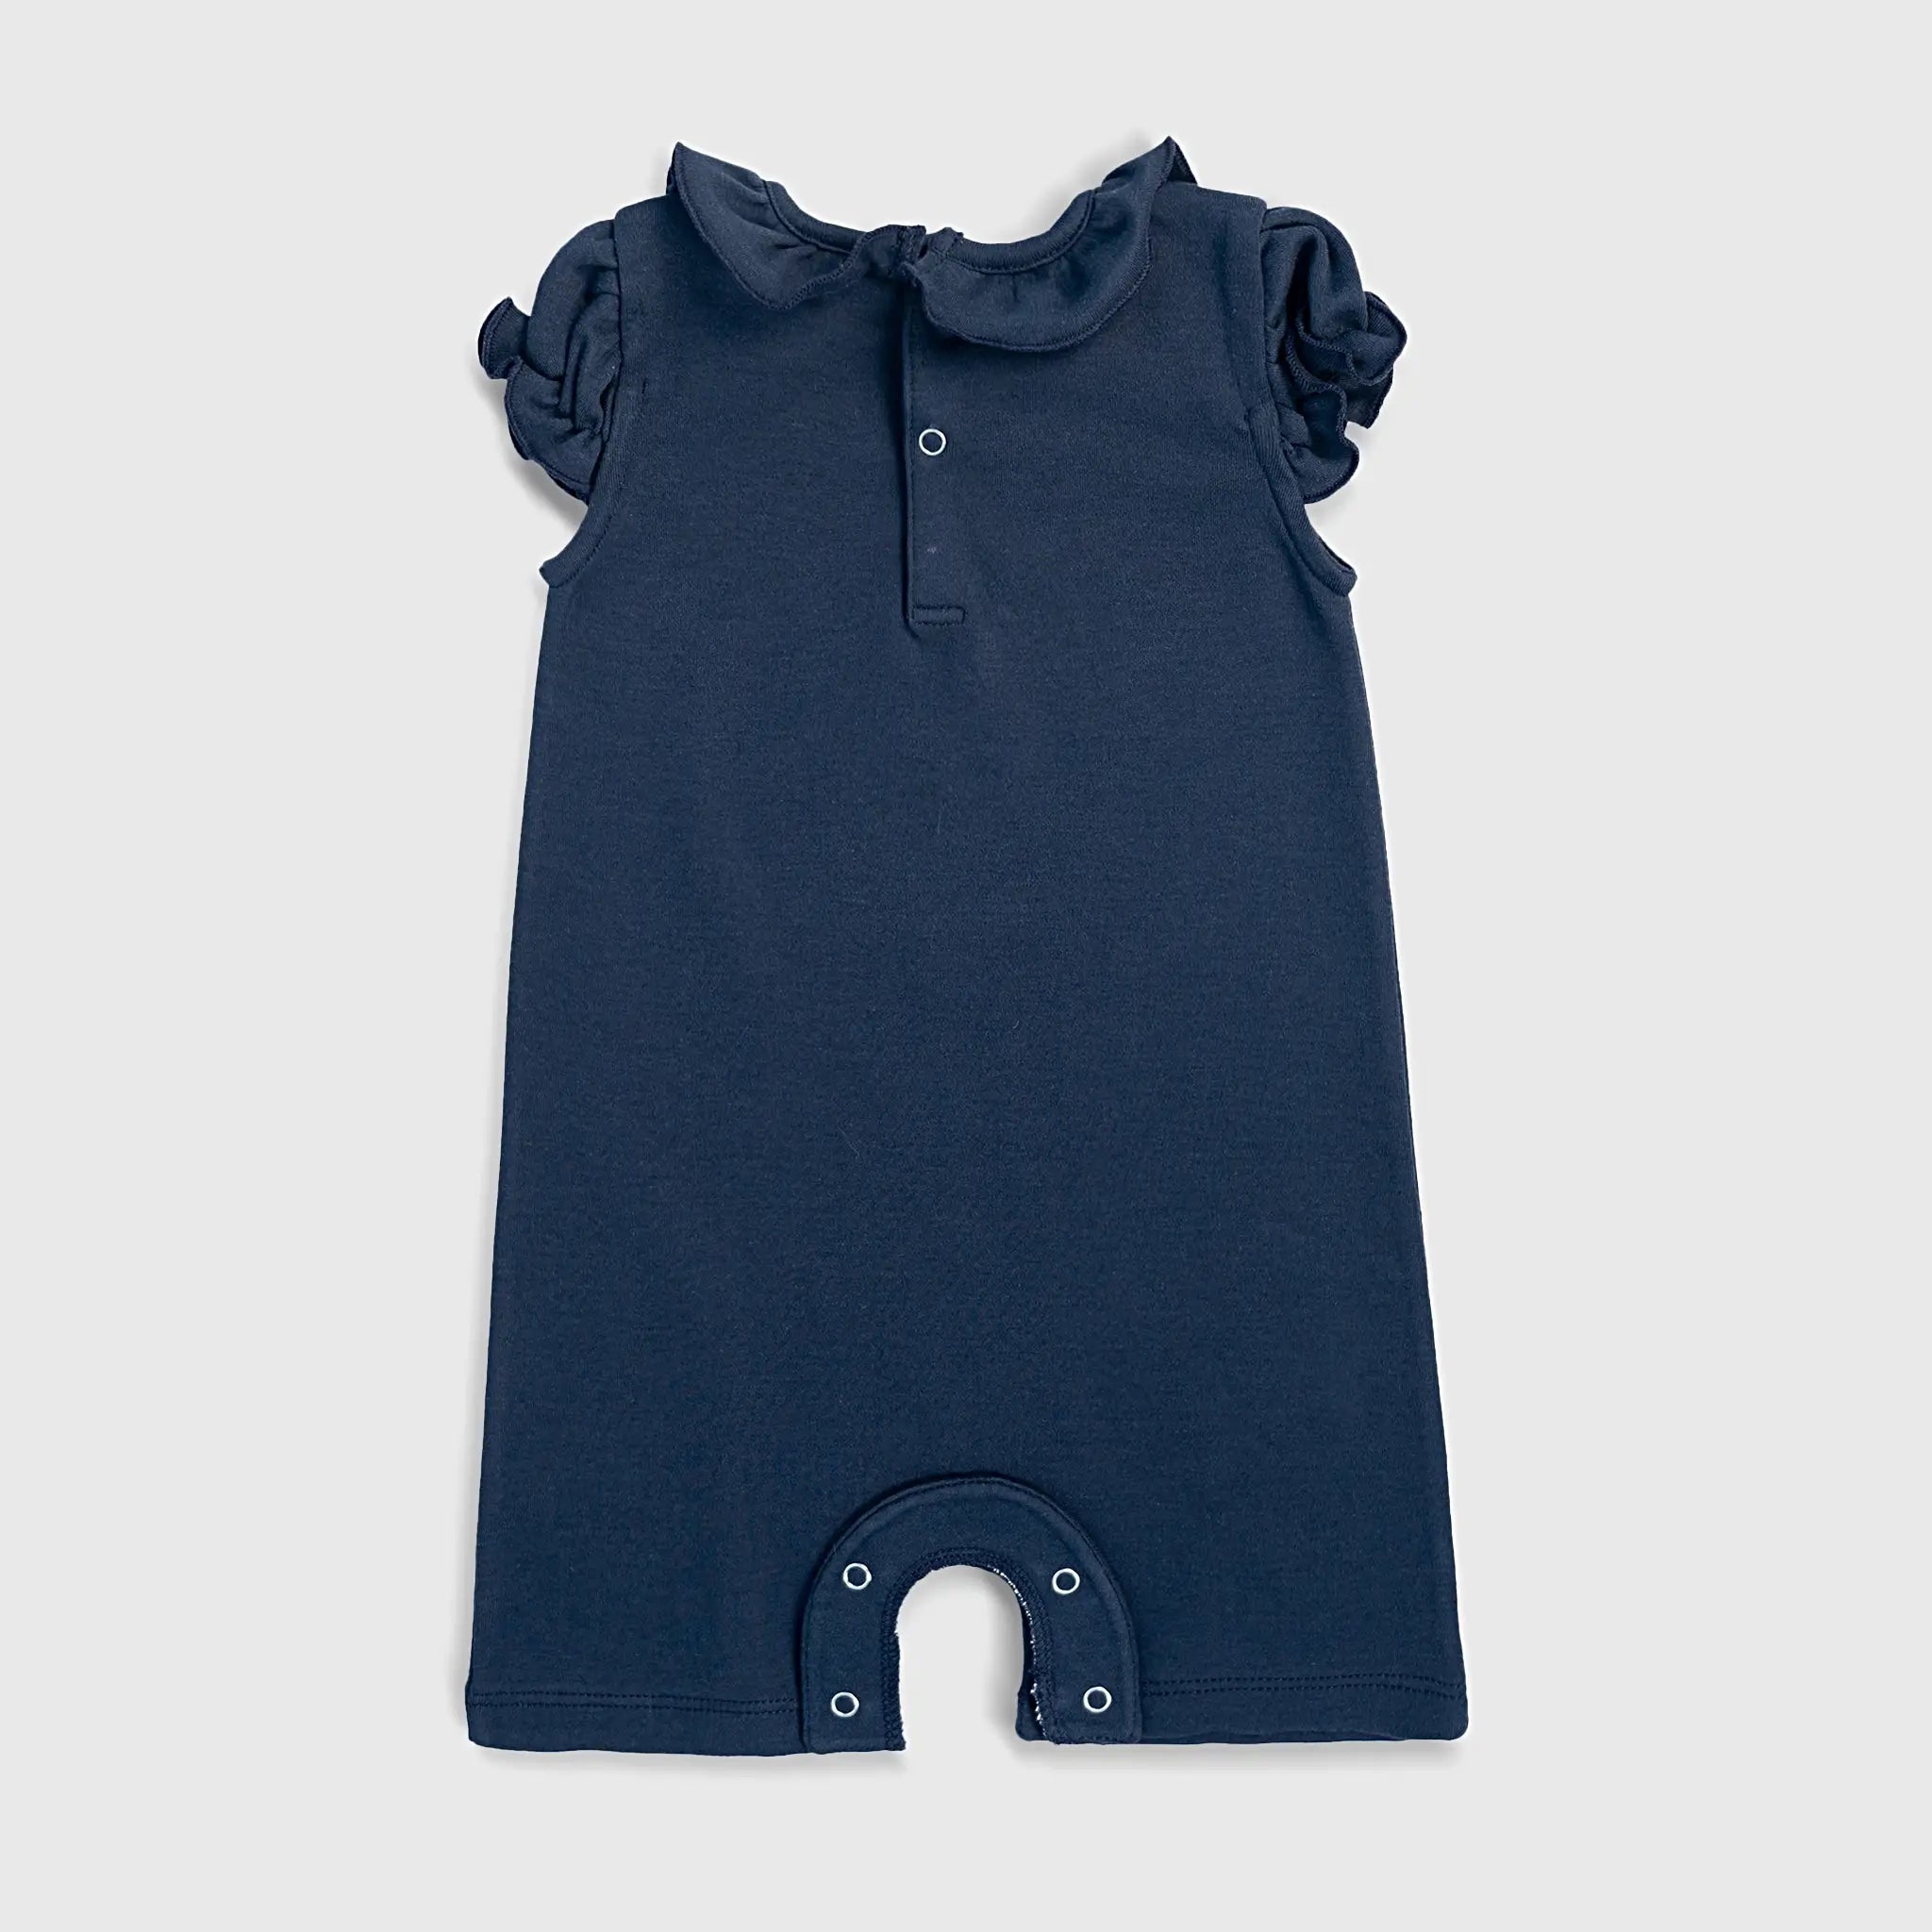 baby girl sustainable romper color navy blue